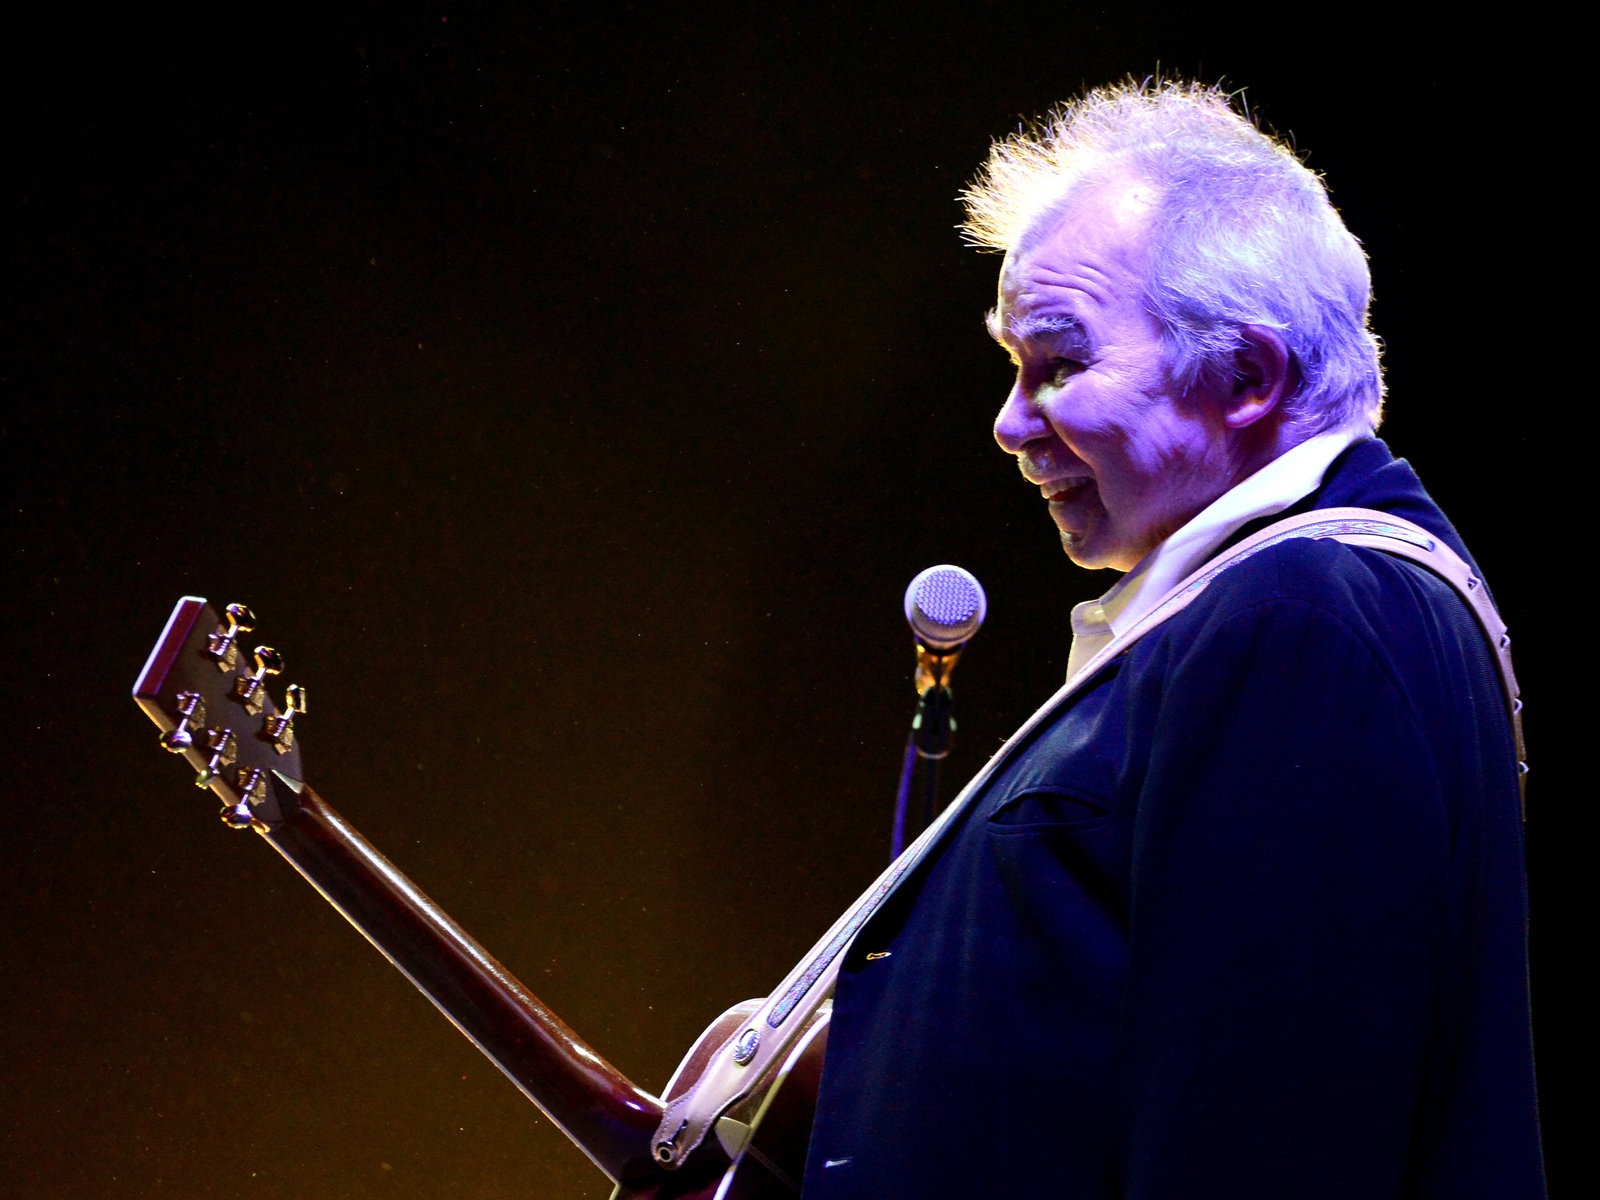 Rip John Prine A Man Whose Songs Saw The Whole Of Us Northwest Public Broadcasting